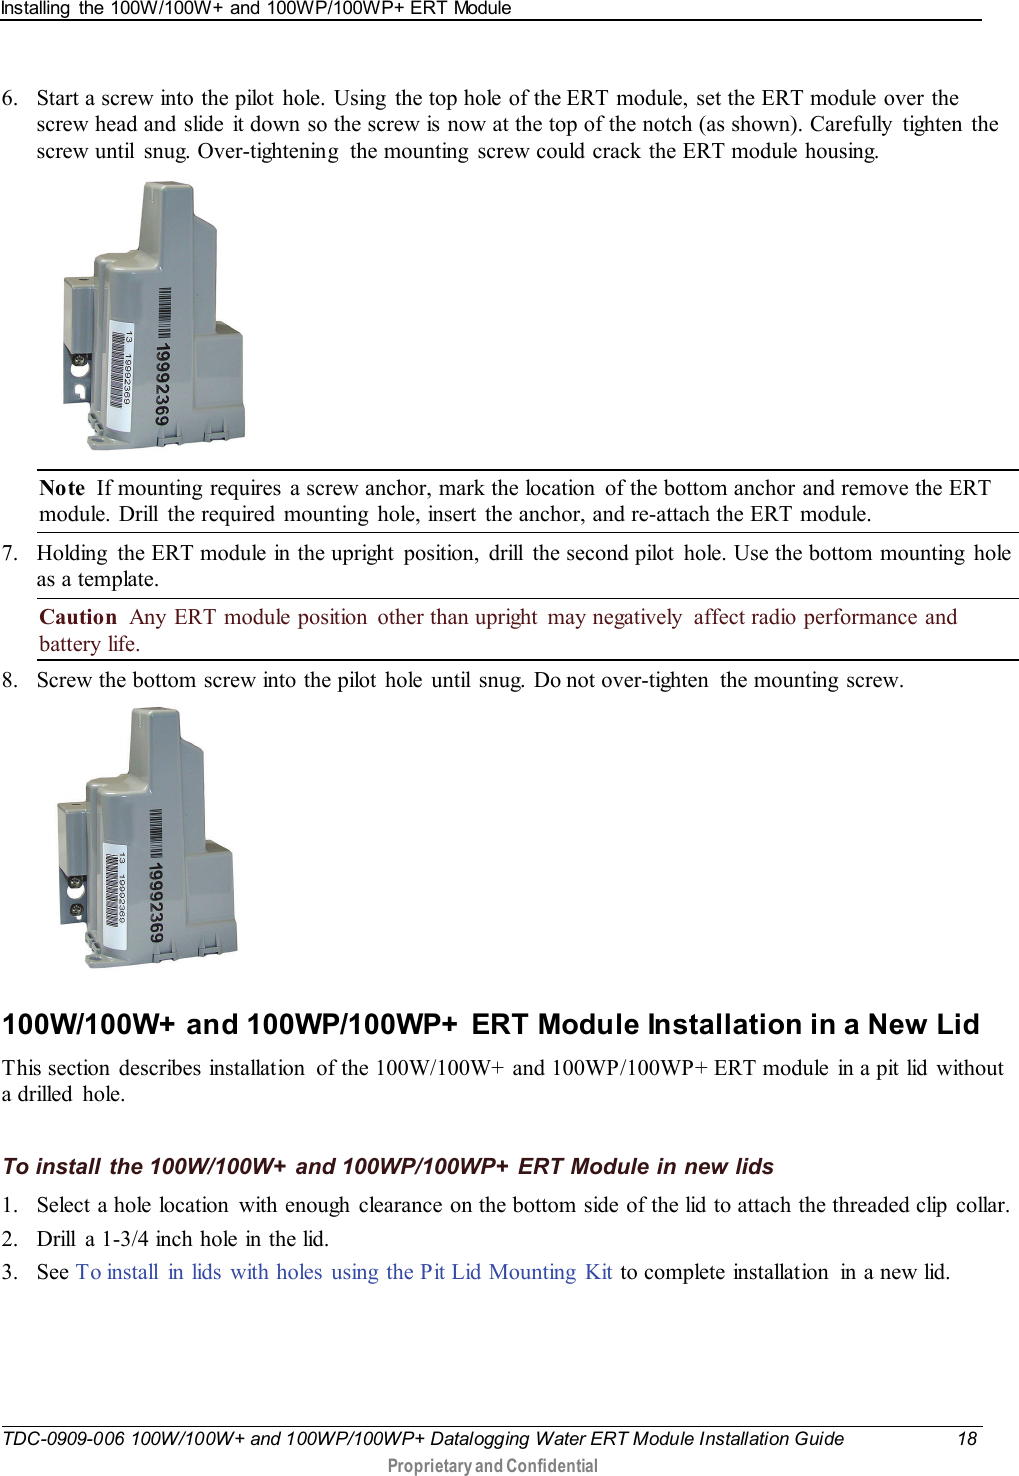 Installing  the 100W/100W+ and 100WP/100WP+ ERT Module   TDC-0909-006 100W/100W+ and 100WP/100WP+ Datalogging Water ERT Module Installation Guide 18  Proprietary and Confidential    6. Start a screw into the pilot  hole. Using  the top hole of the ERT module, set the ERT module over the screw head and slide  it down so the screw is now at the top of the notch (as shown). Carefully  tighten  the screw until  snug. Over-tightening  the mounting  screw could crack the ERT module housing.  Note  If mounting  requires a screw anchor, mark the location  of the bottom anchor and remove the ERT module. Drill  the required mounting  hole, insert the anchor, and re-attach the ERT module. 7. Holding  the ERT module in the upright  position, drill  the second pilot  hole. Use the bottom mounting  hole as a template. Caution  Any ERT module position  other than upright  may negatively  affect radio performance and battery life. 8. Screw the bottom screw into the pilot  hole until snug. Do not over-tighten  the mounting  screw.   100W/100W+  and 100WP/100WP+  ERT Module Installation in a New Lid This section  describes installation  of the 100W/100W+ and 100WP/100WP+ ERT module  in a pit lid  without a drilled  hole.   To install the 100W/100W+ and 100WP/100WP+ ERT Module in new lids 1. Select a hole location  with enough  clearance on the bottom side of the lid to attach the threaded clip collar. 2. Drill  a 1-3/4 inch hole in the lid. 3. See T o install  in lids with holes using the Pit Lid Mounting Kit to complete installation  in a new lid.  